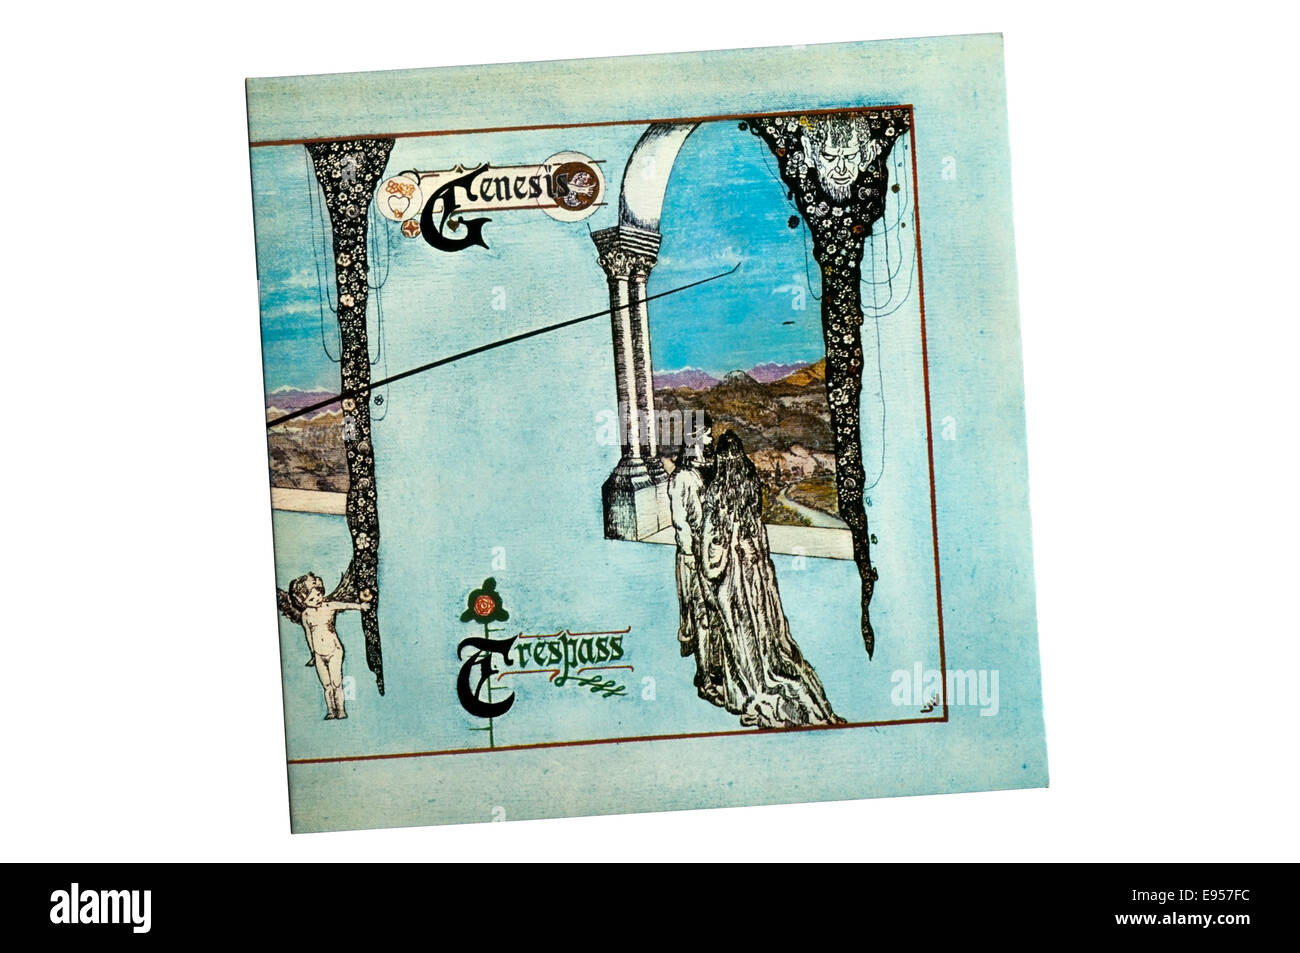 Trespass was the second studio album by Genesis, recorded and released in 1970. Stock Photo